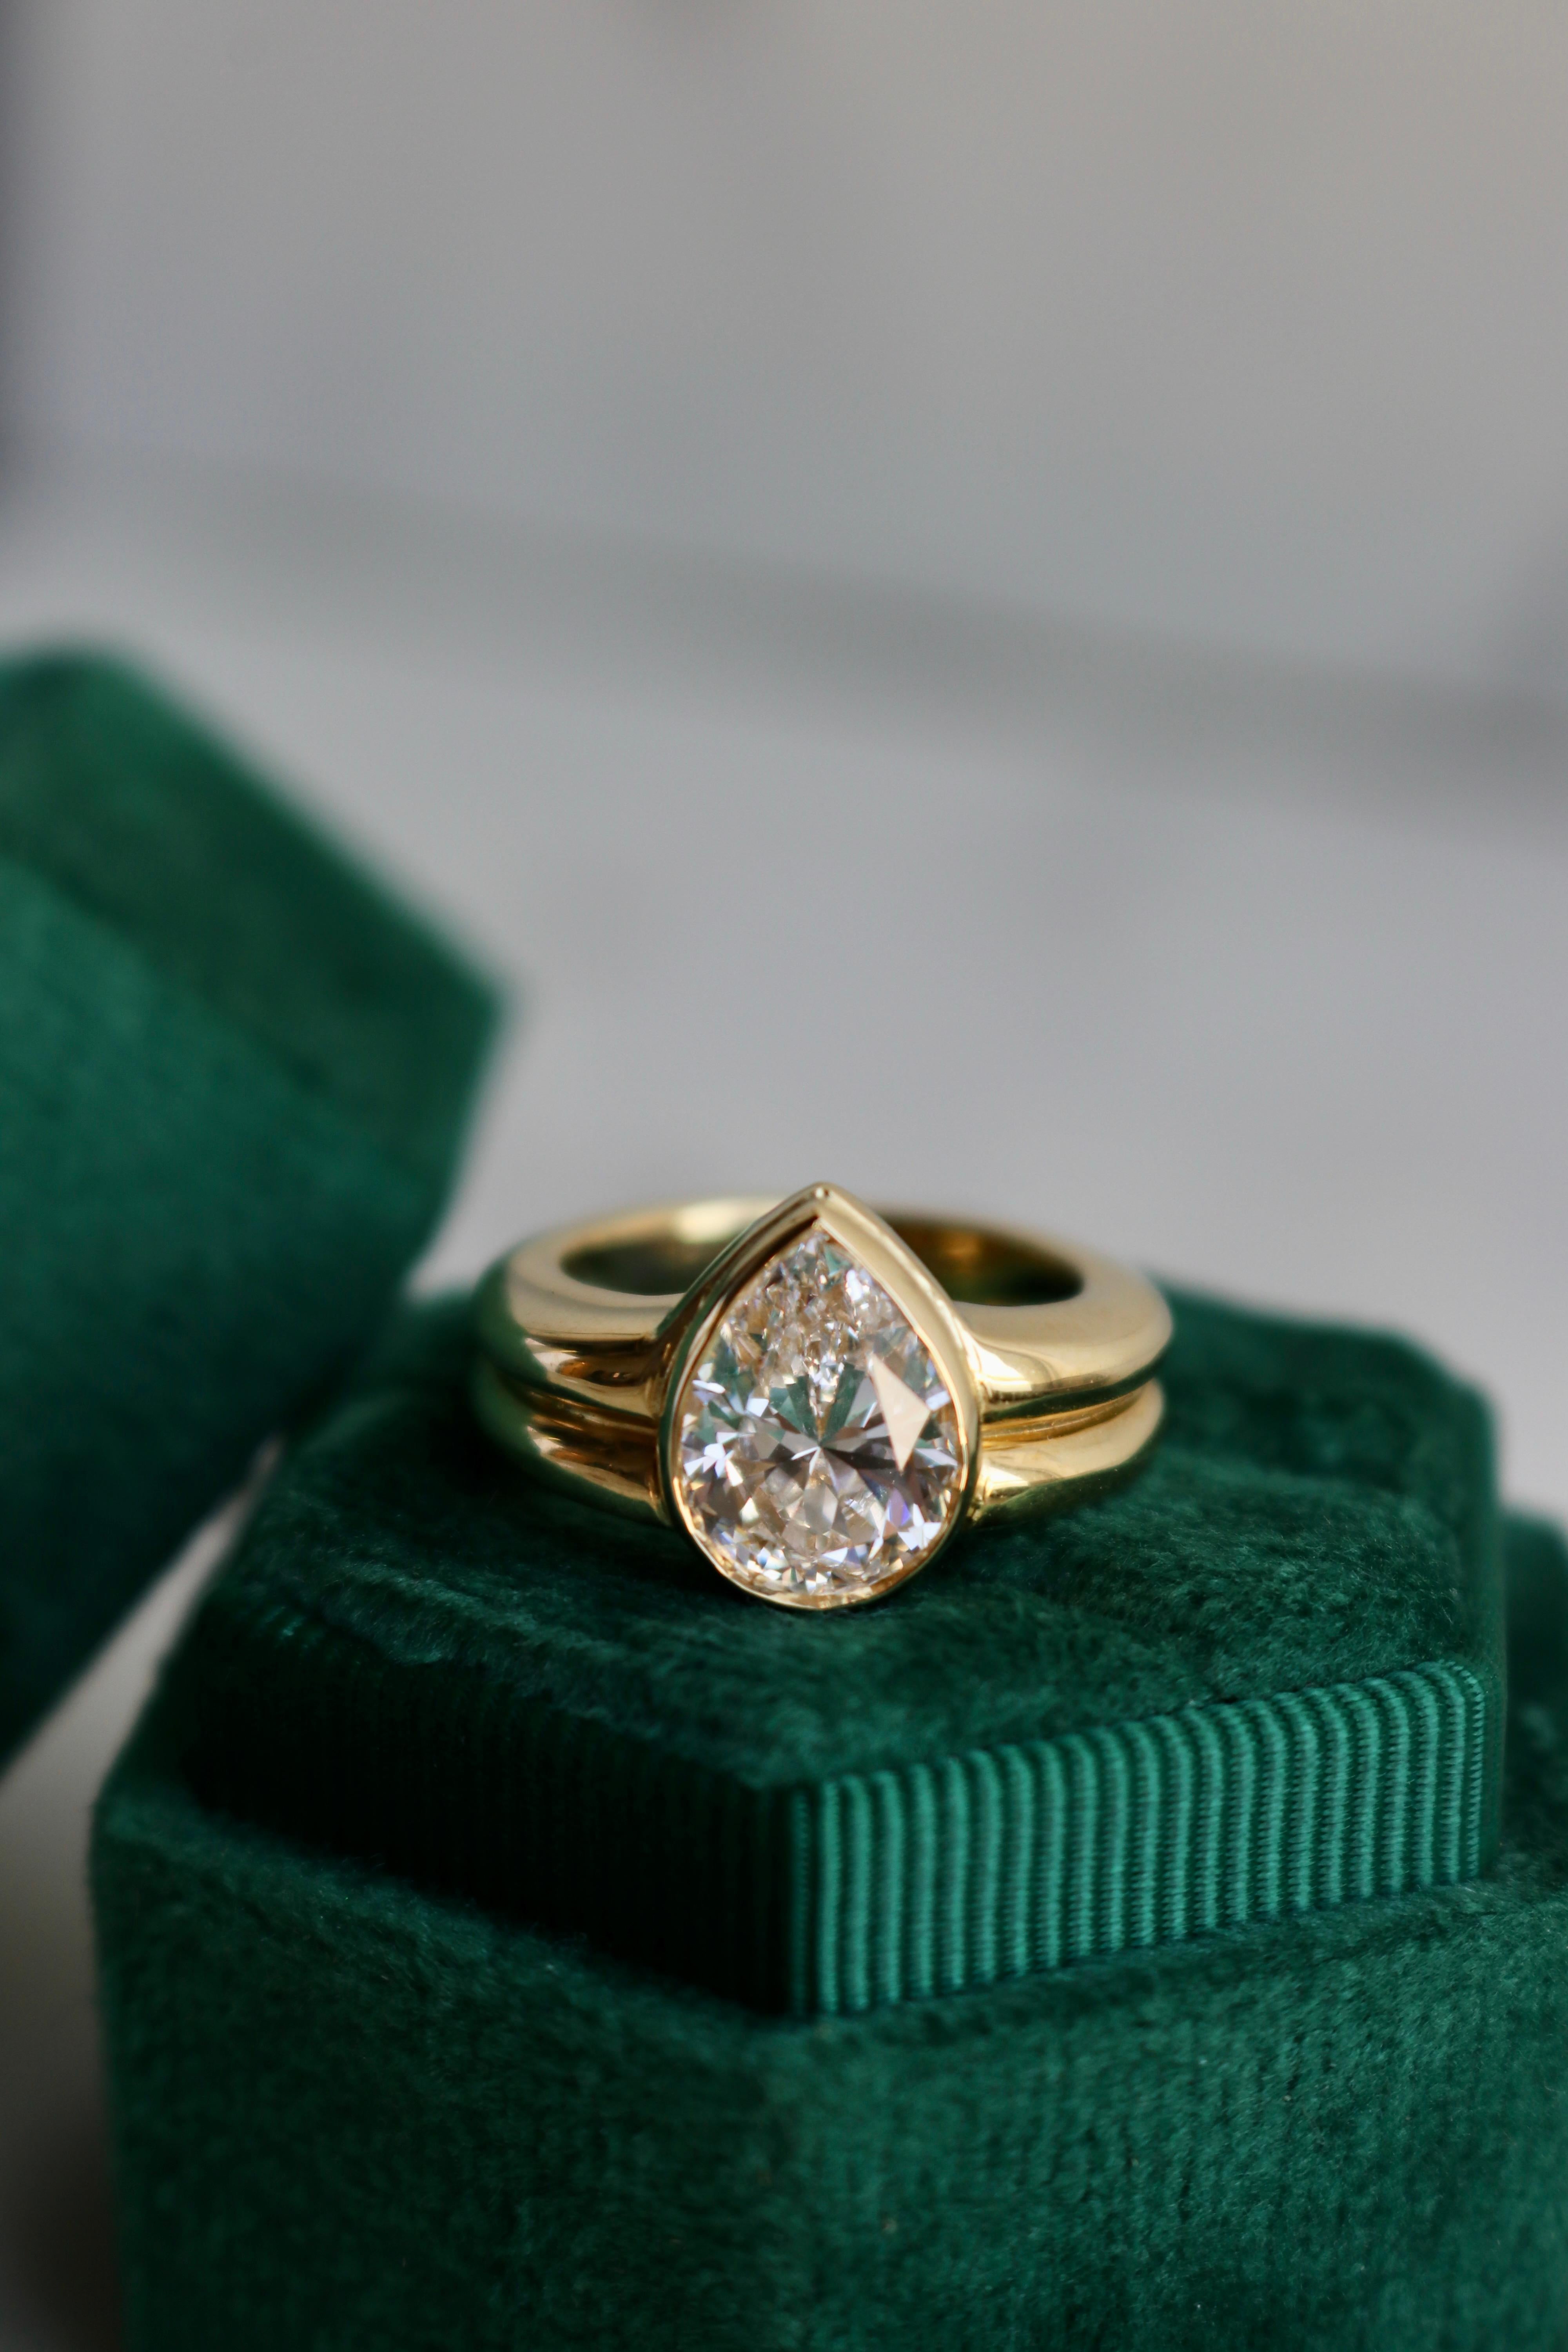 Vintage French GIA 2.85 Carat Pear Cut Diamond 18k Yellow Gold Ring For Sale 2